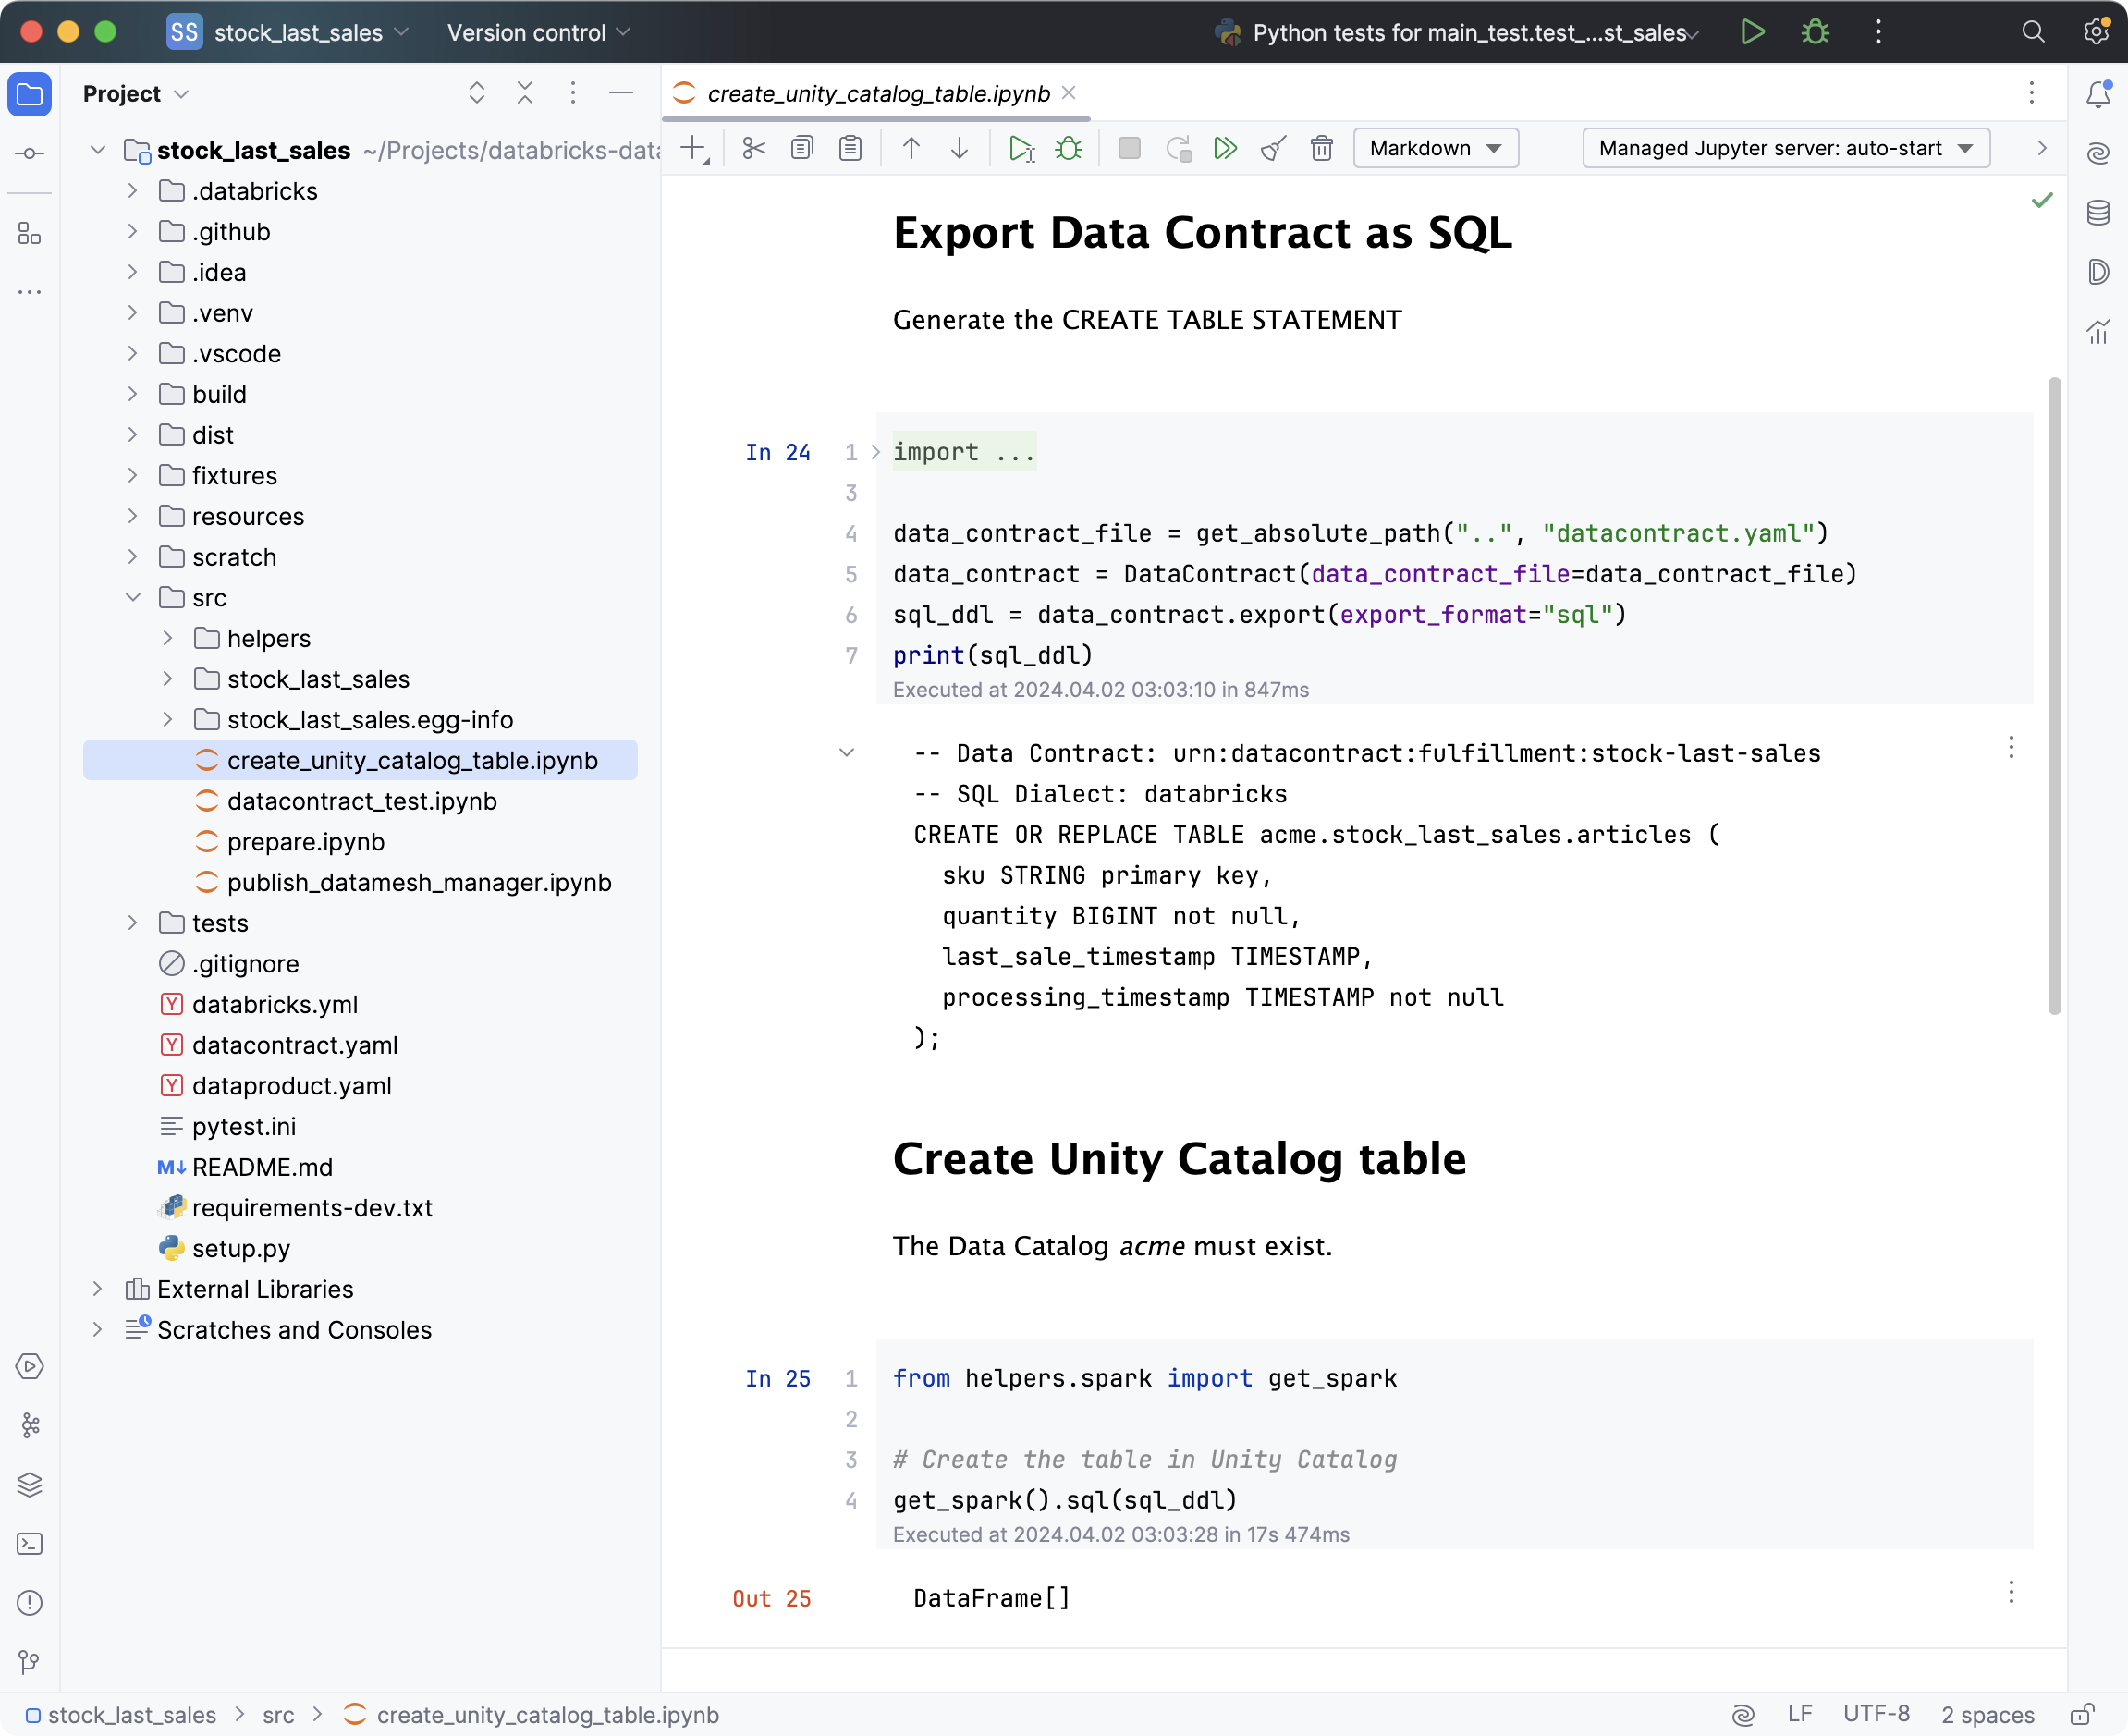 Use Data Contract CLI to create the Unity Catalog Table